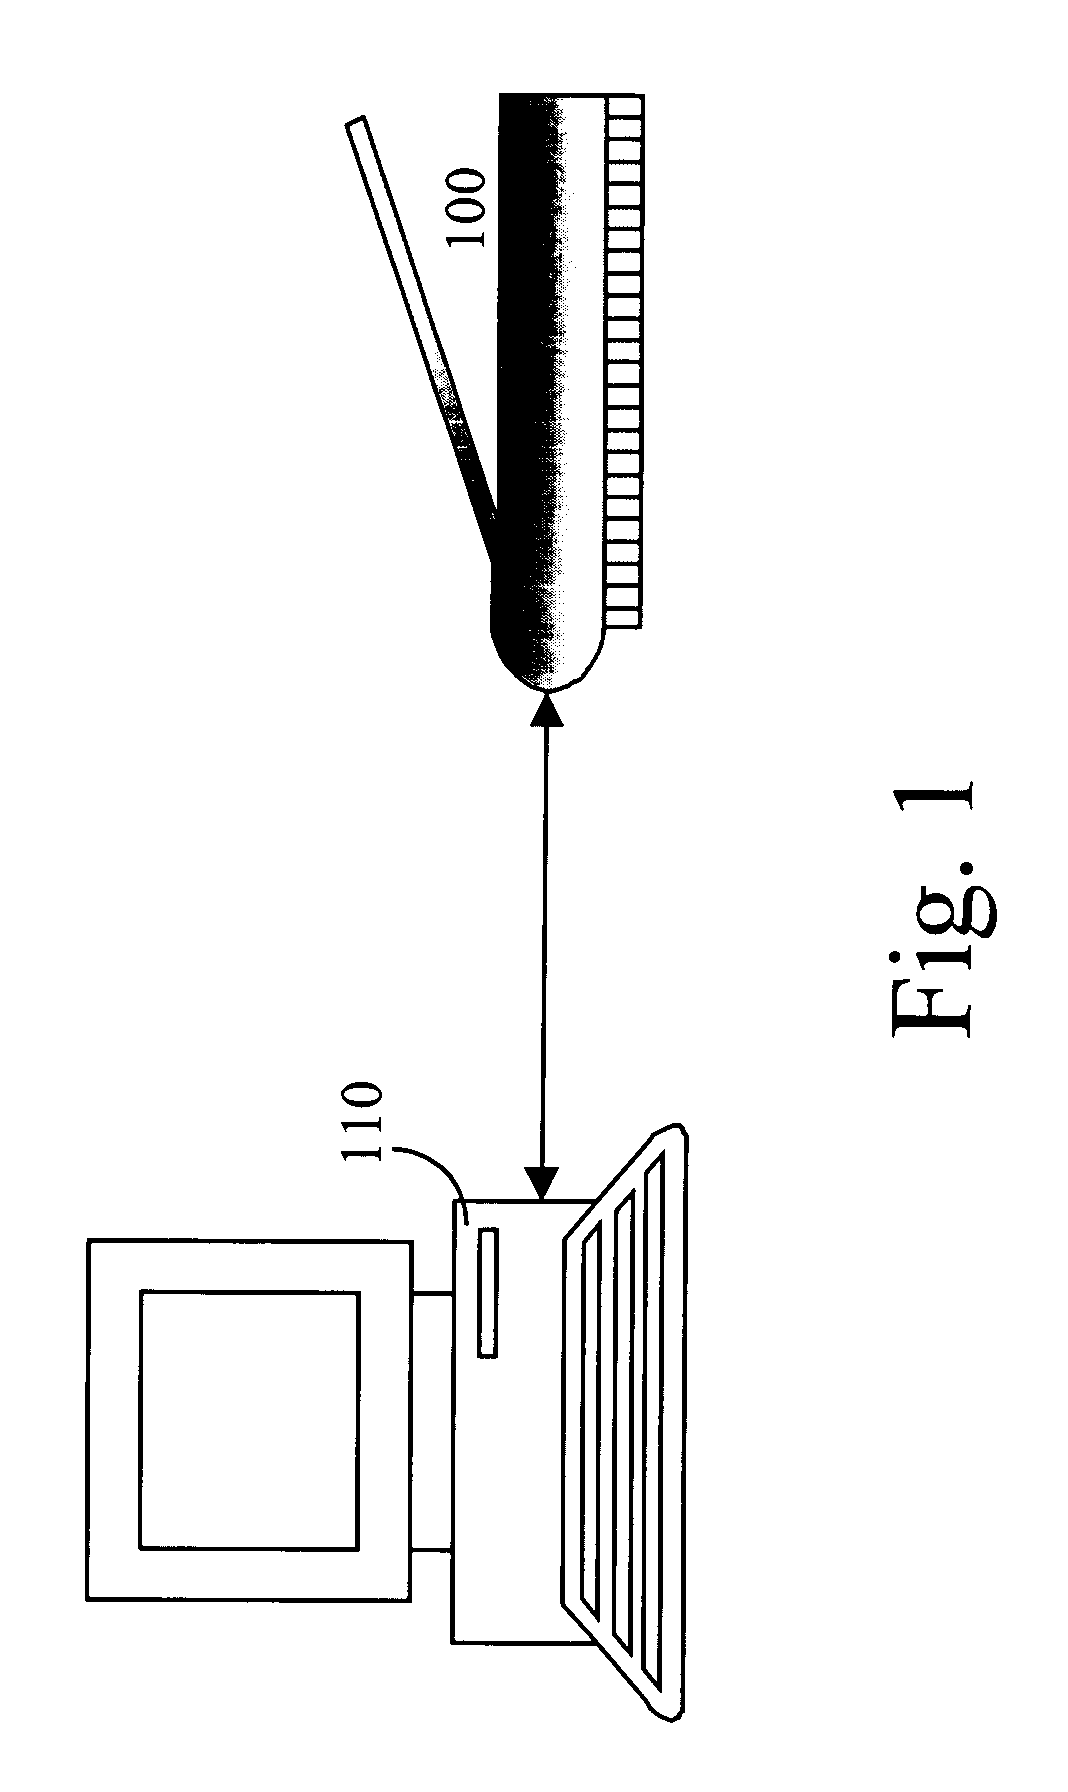 Method and apparatus for scanning feet for the purpose of manufacturing orthotics and other footwear